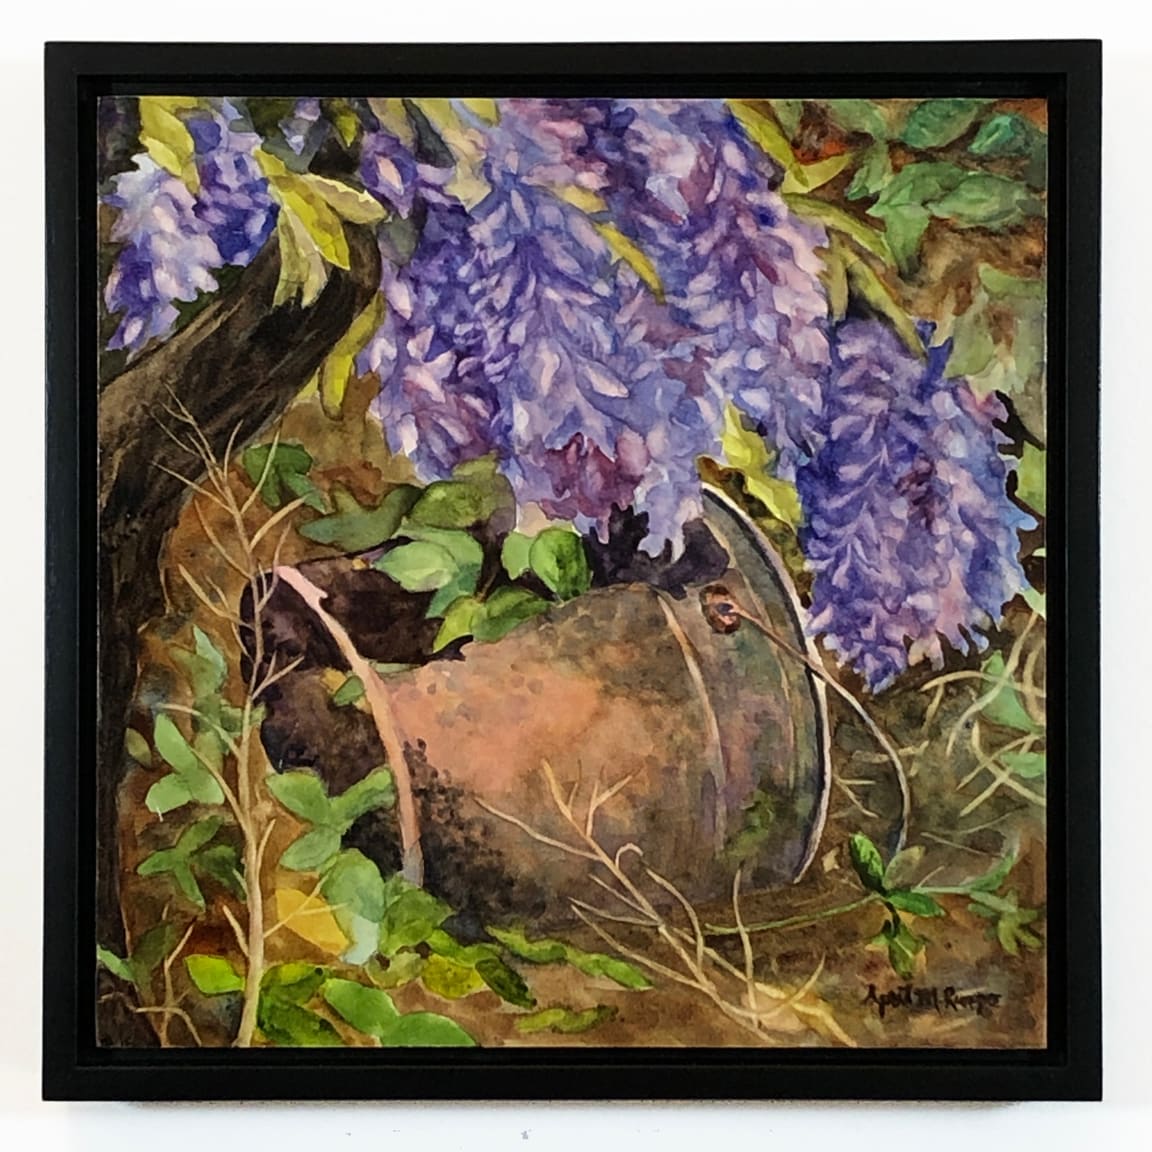 Wisteria in the Woods by April Rimpo  Image: Presented in a black floater frame